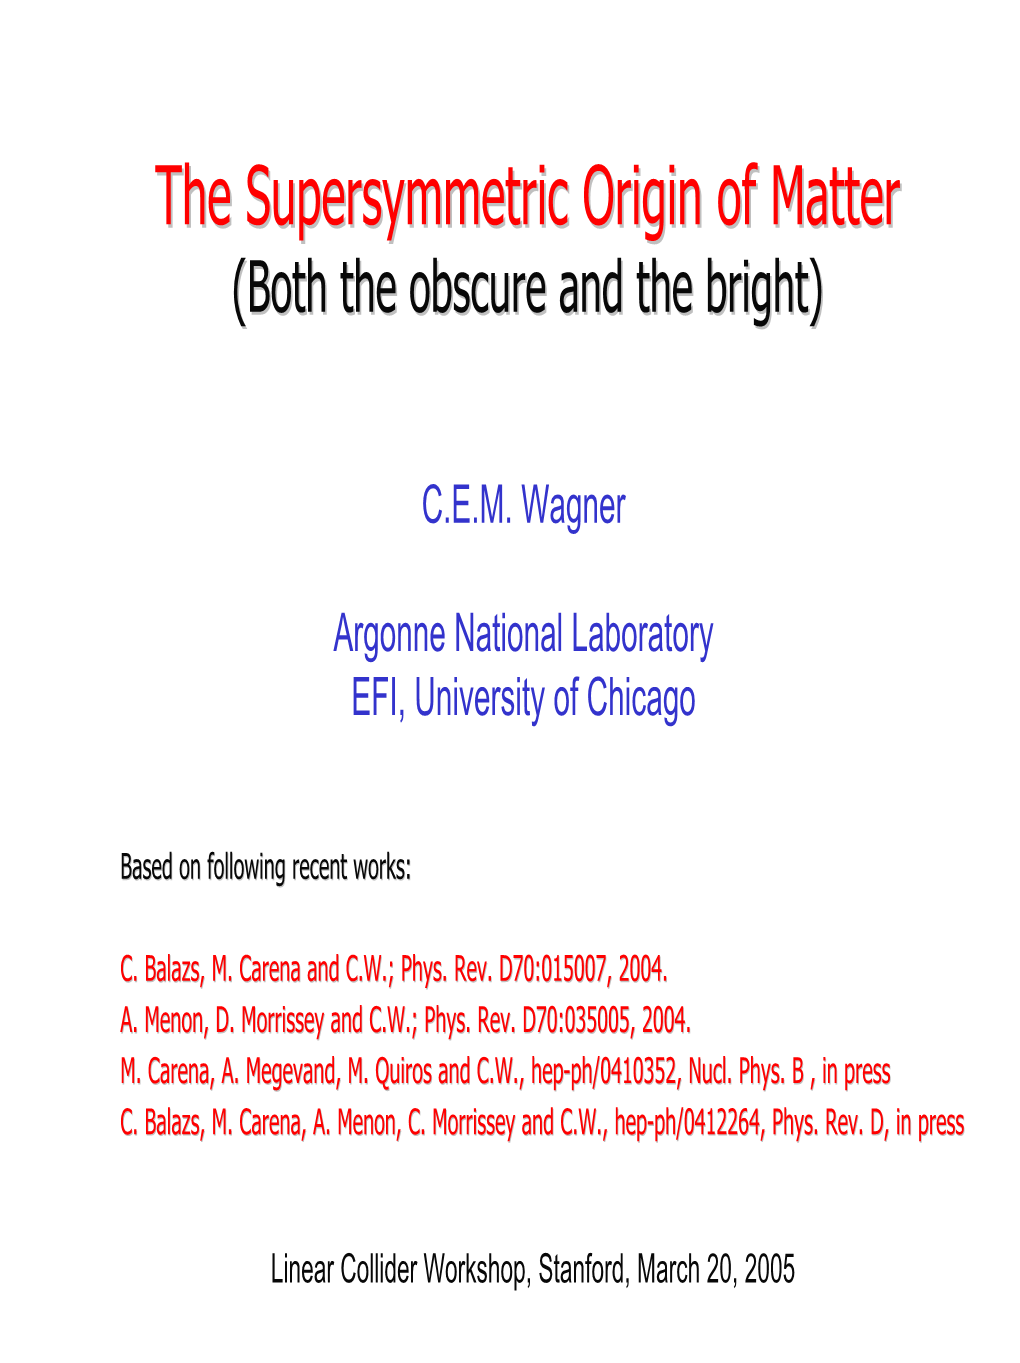 Supersymmetry, the Baryon Asymmetyry and the Origin